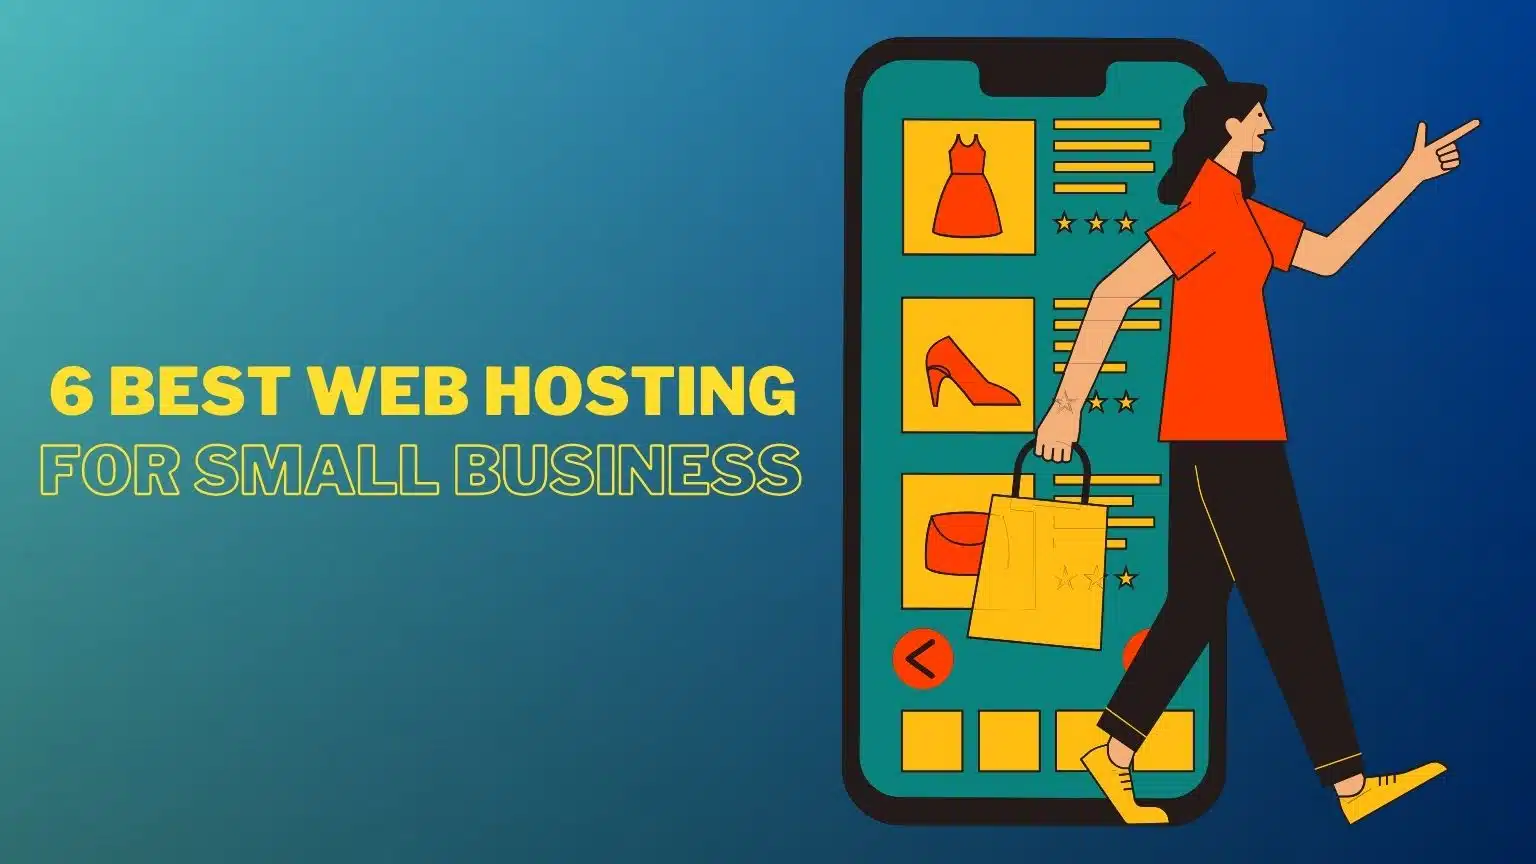 6 Best Web Hosting Services For Small Business